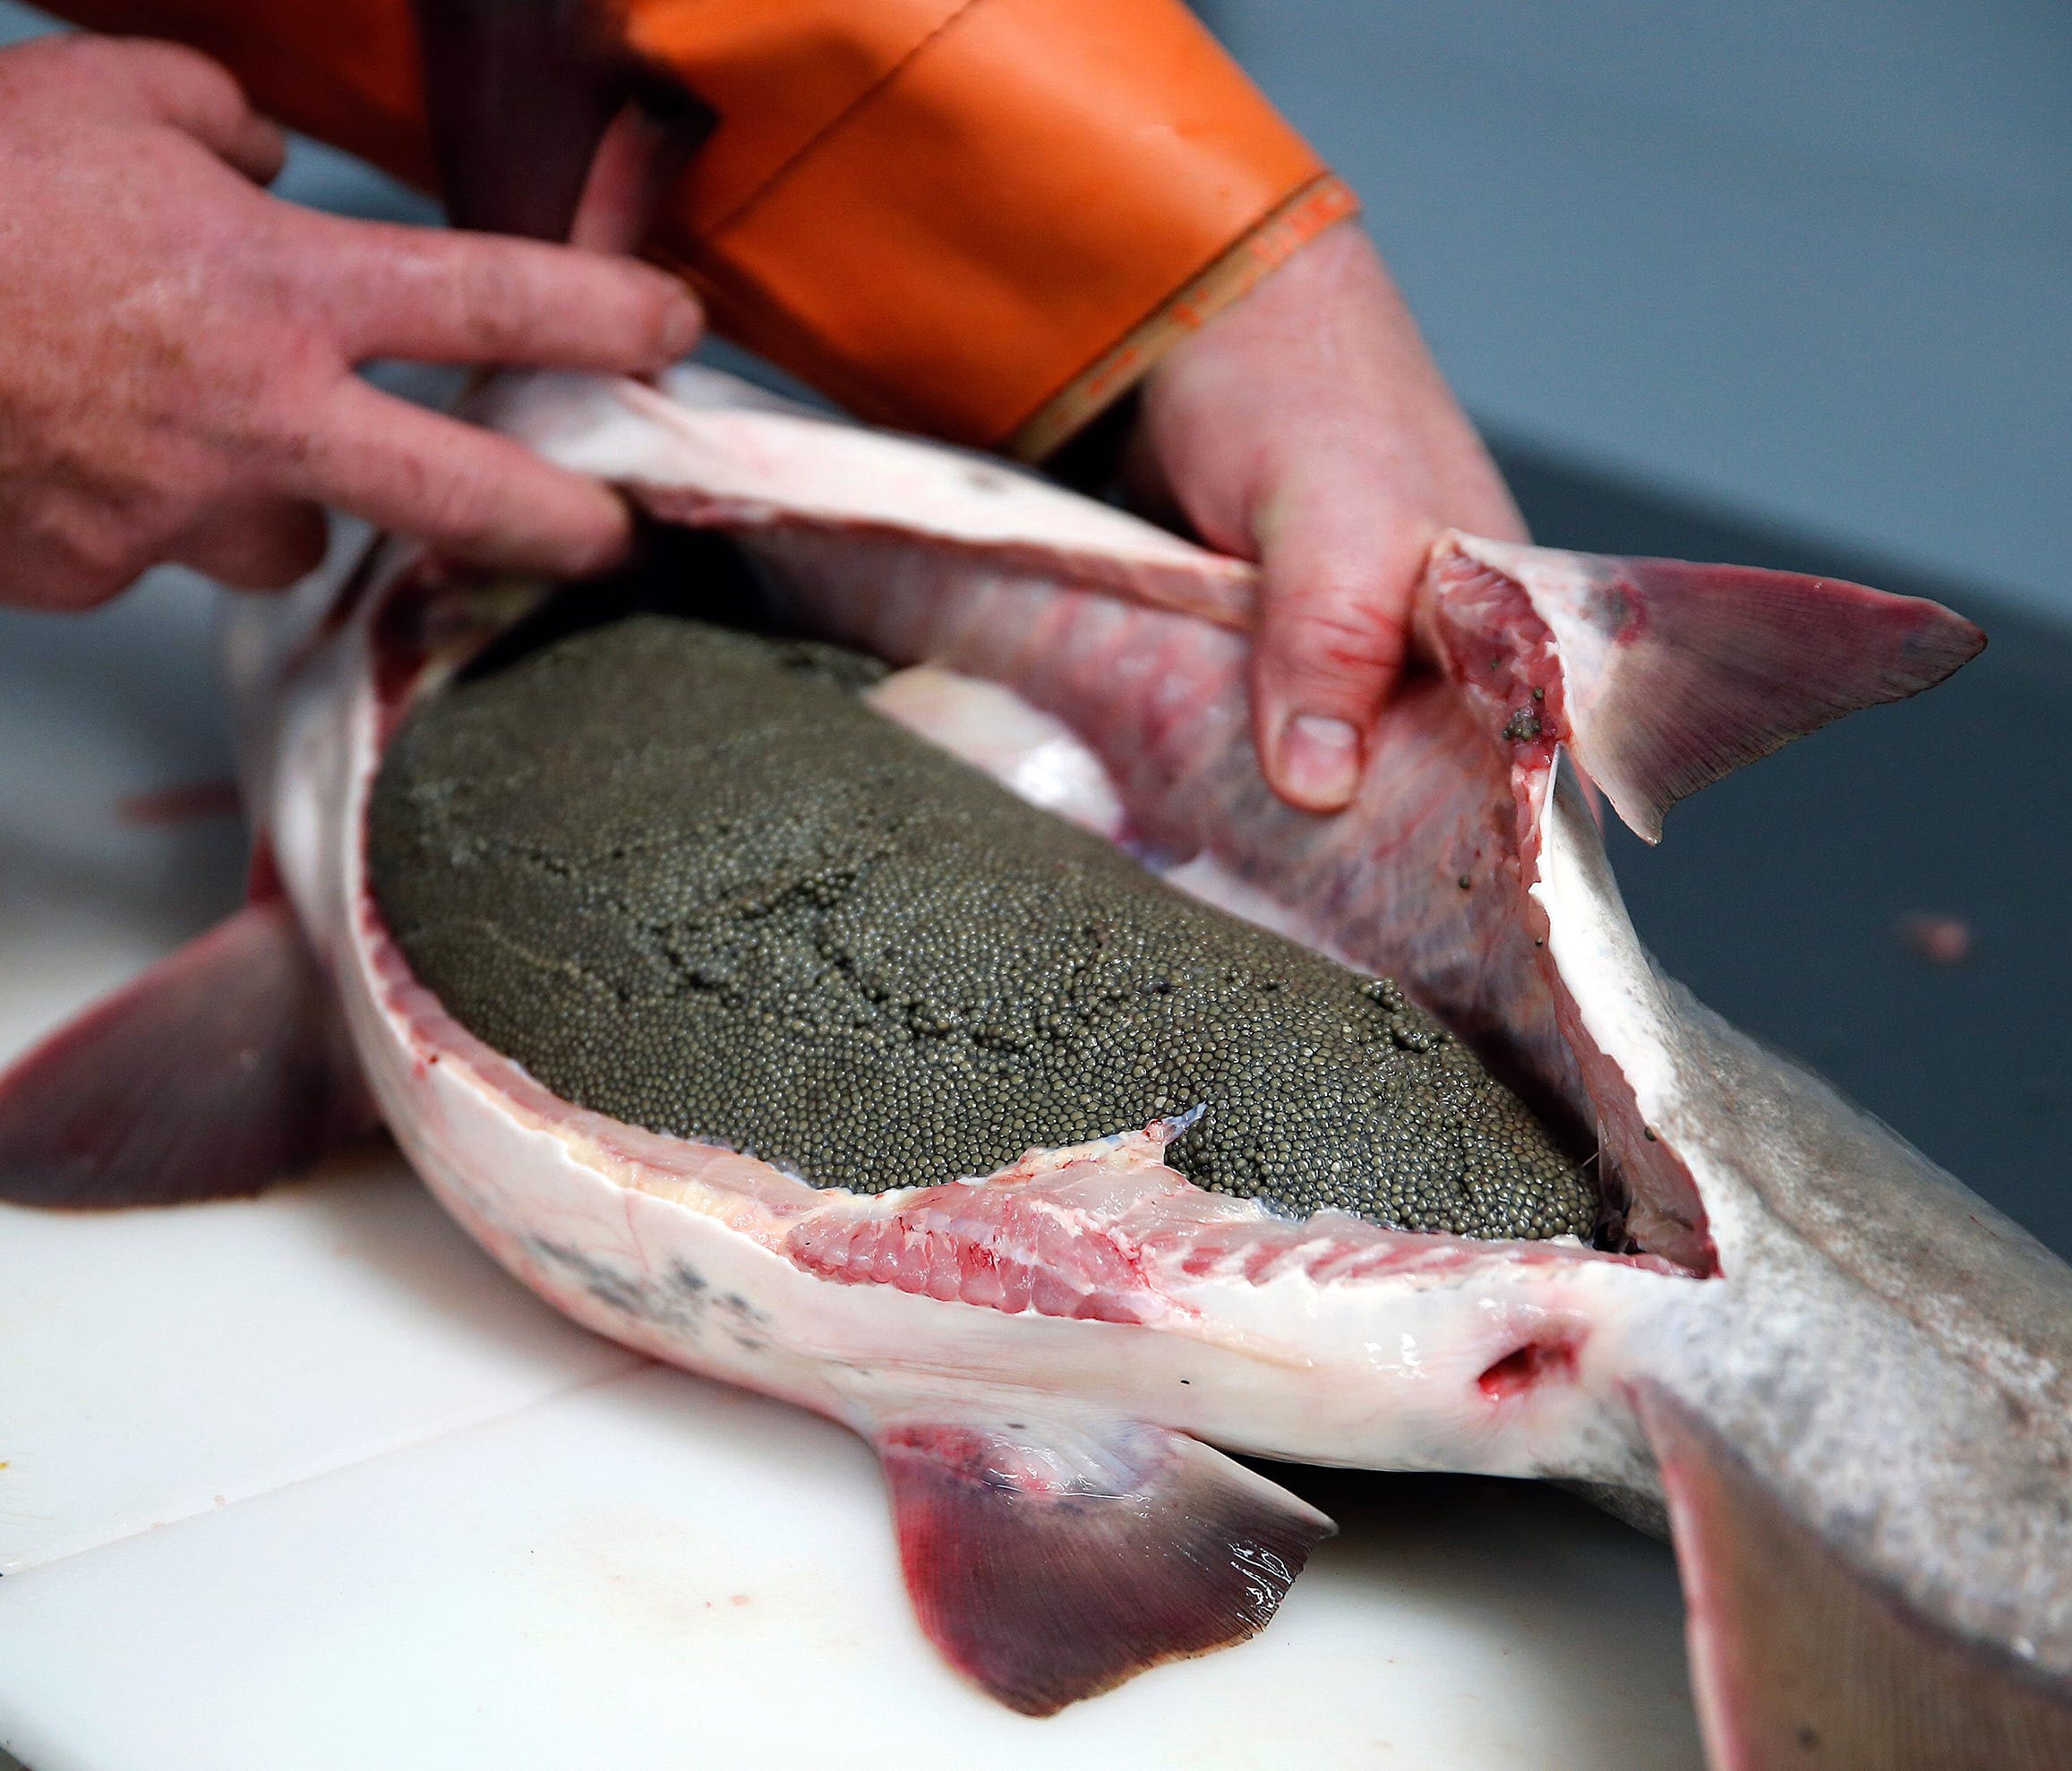 Keith Koerner of Big Fish Farms in Bethel, Ohio,  shows the unprocessed caviar inside a female paddlefish. The eggs will be cleaned and brined, and the fish will be cleaned and sold to Cincinnati-area markets and restaurants.